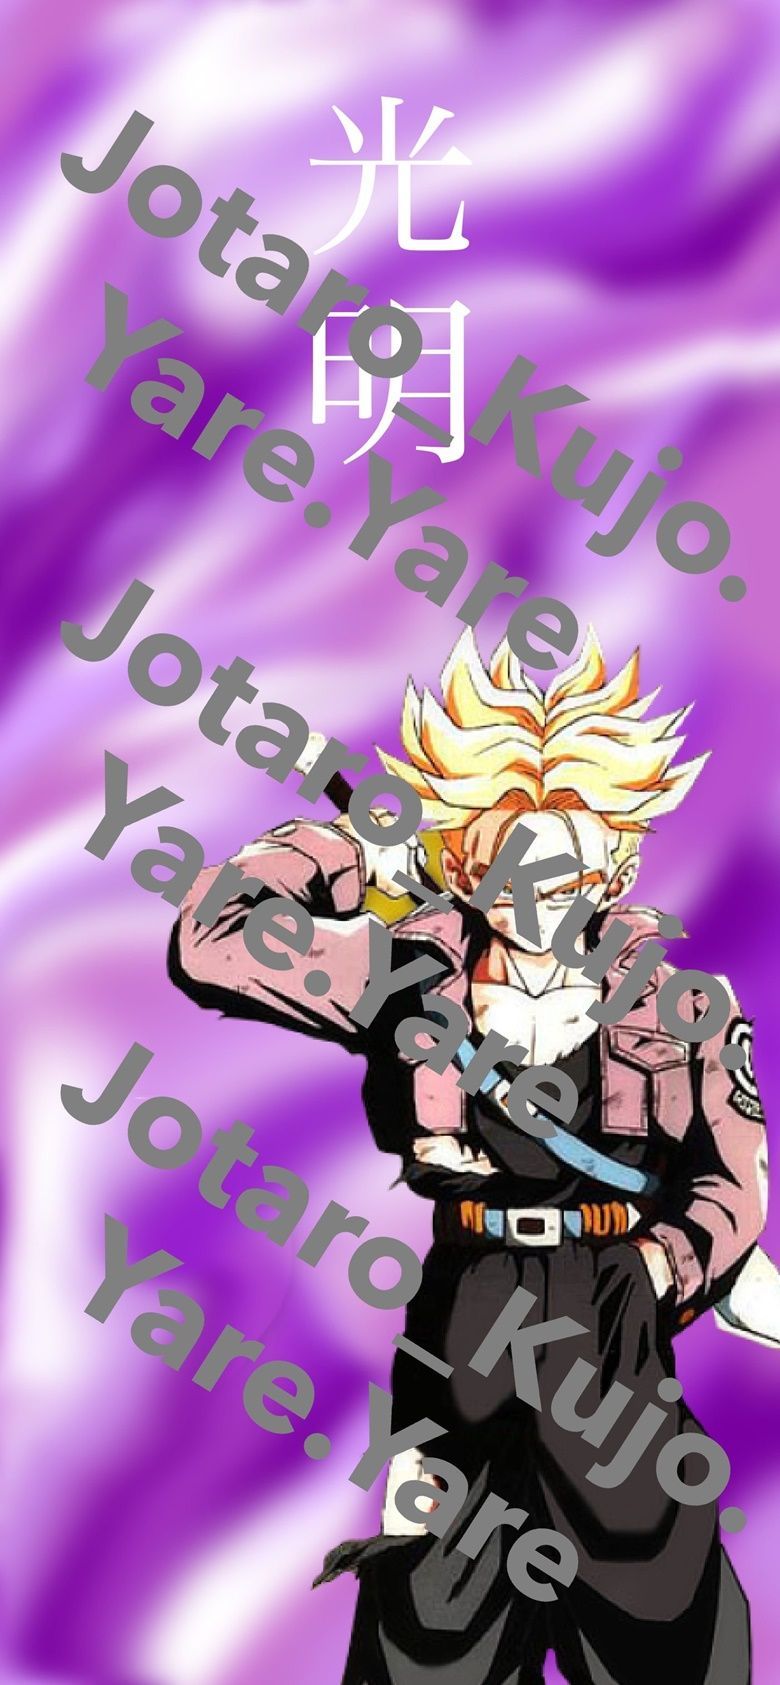 Trunks with his arm out and the word Jotaro written in the background - Dragon Ball